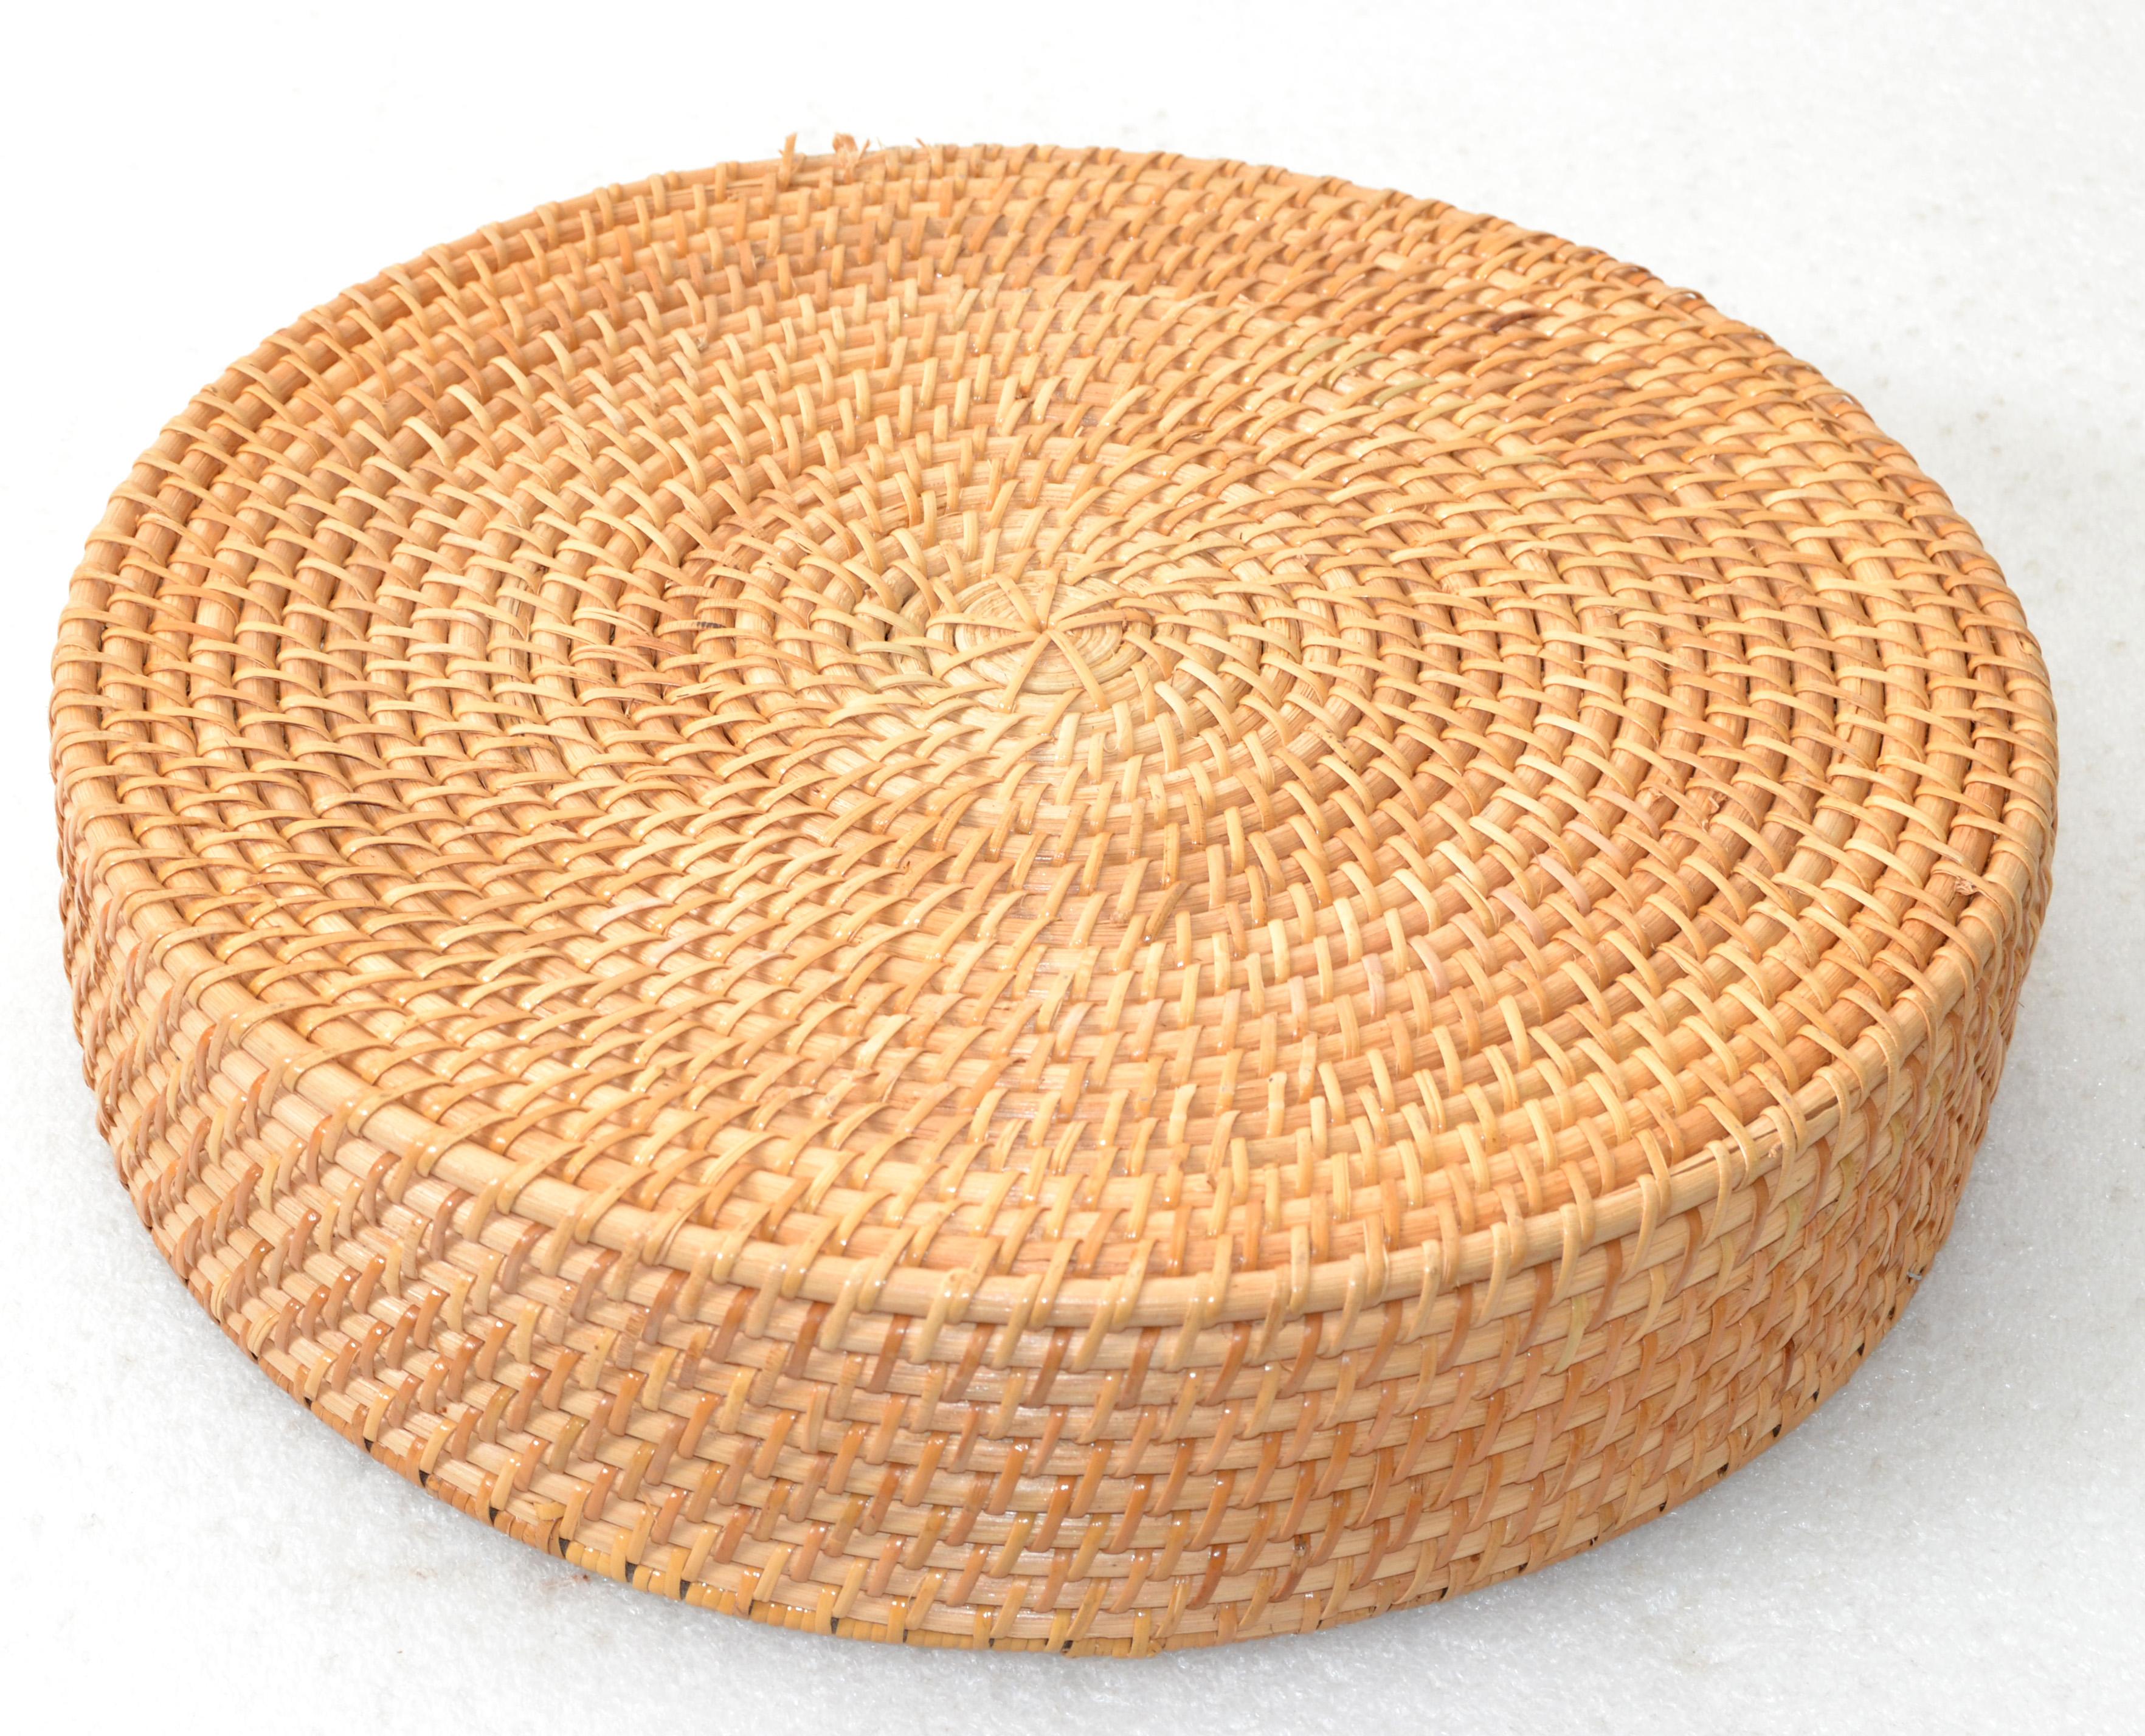 1980 Rattan, Cane & Bamboo Salza Dip & Tortilla Chips Serving Basket, Dish, Bowl In Good Condition For Sale In Miami, FL